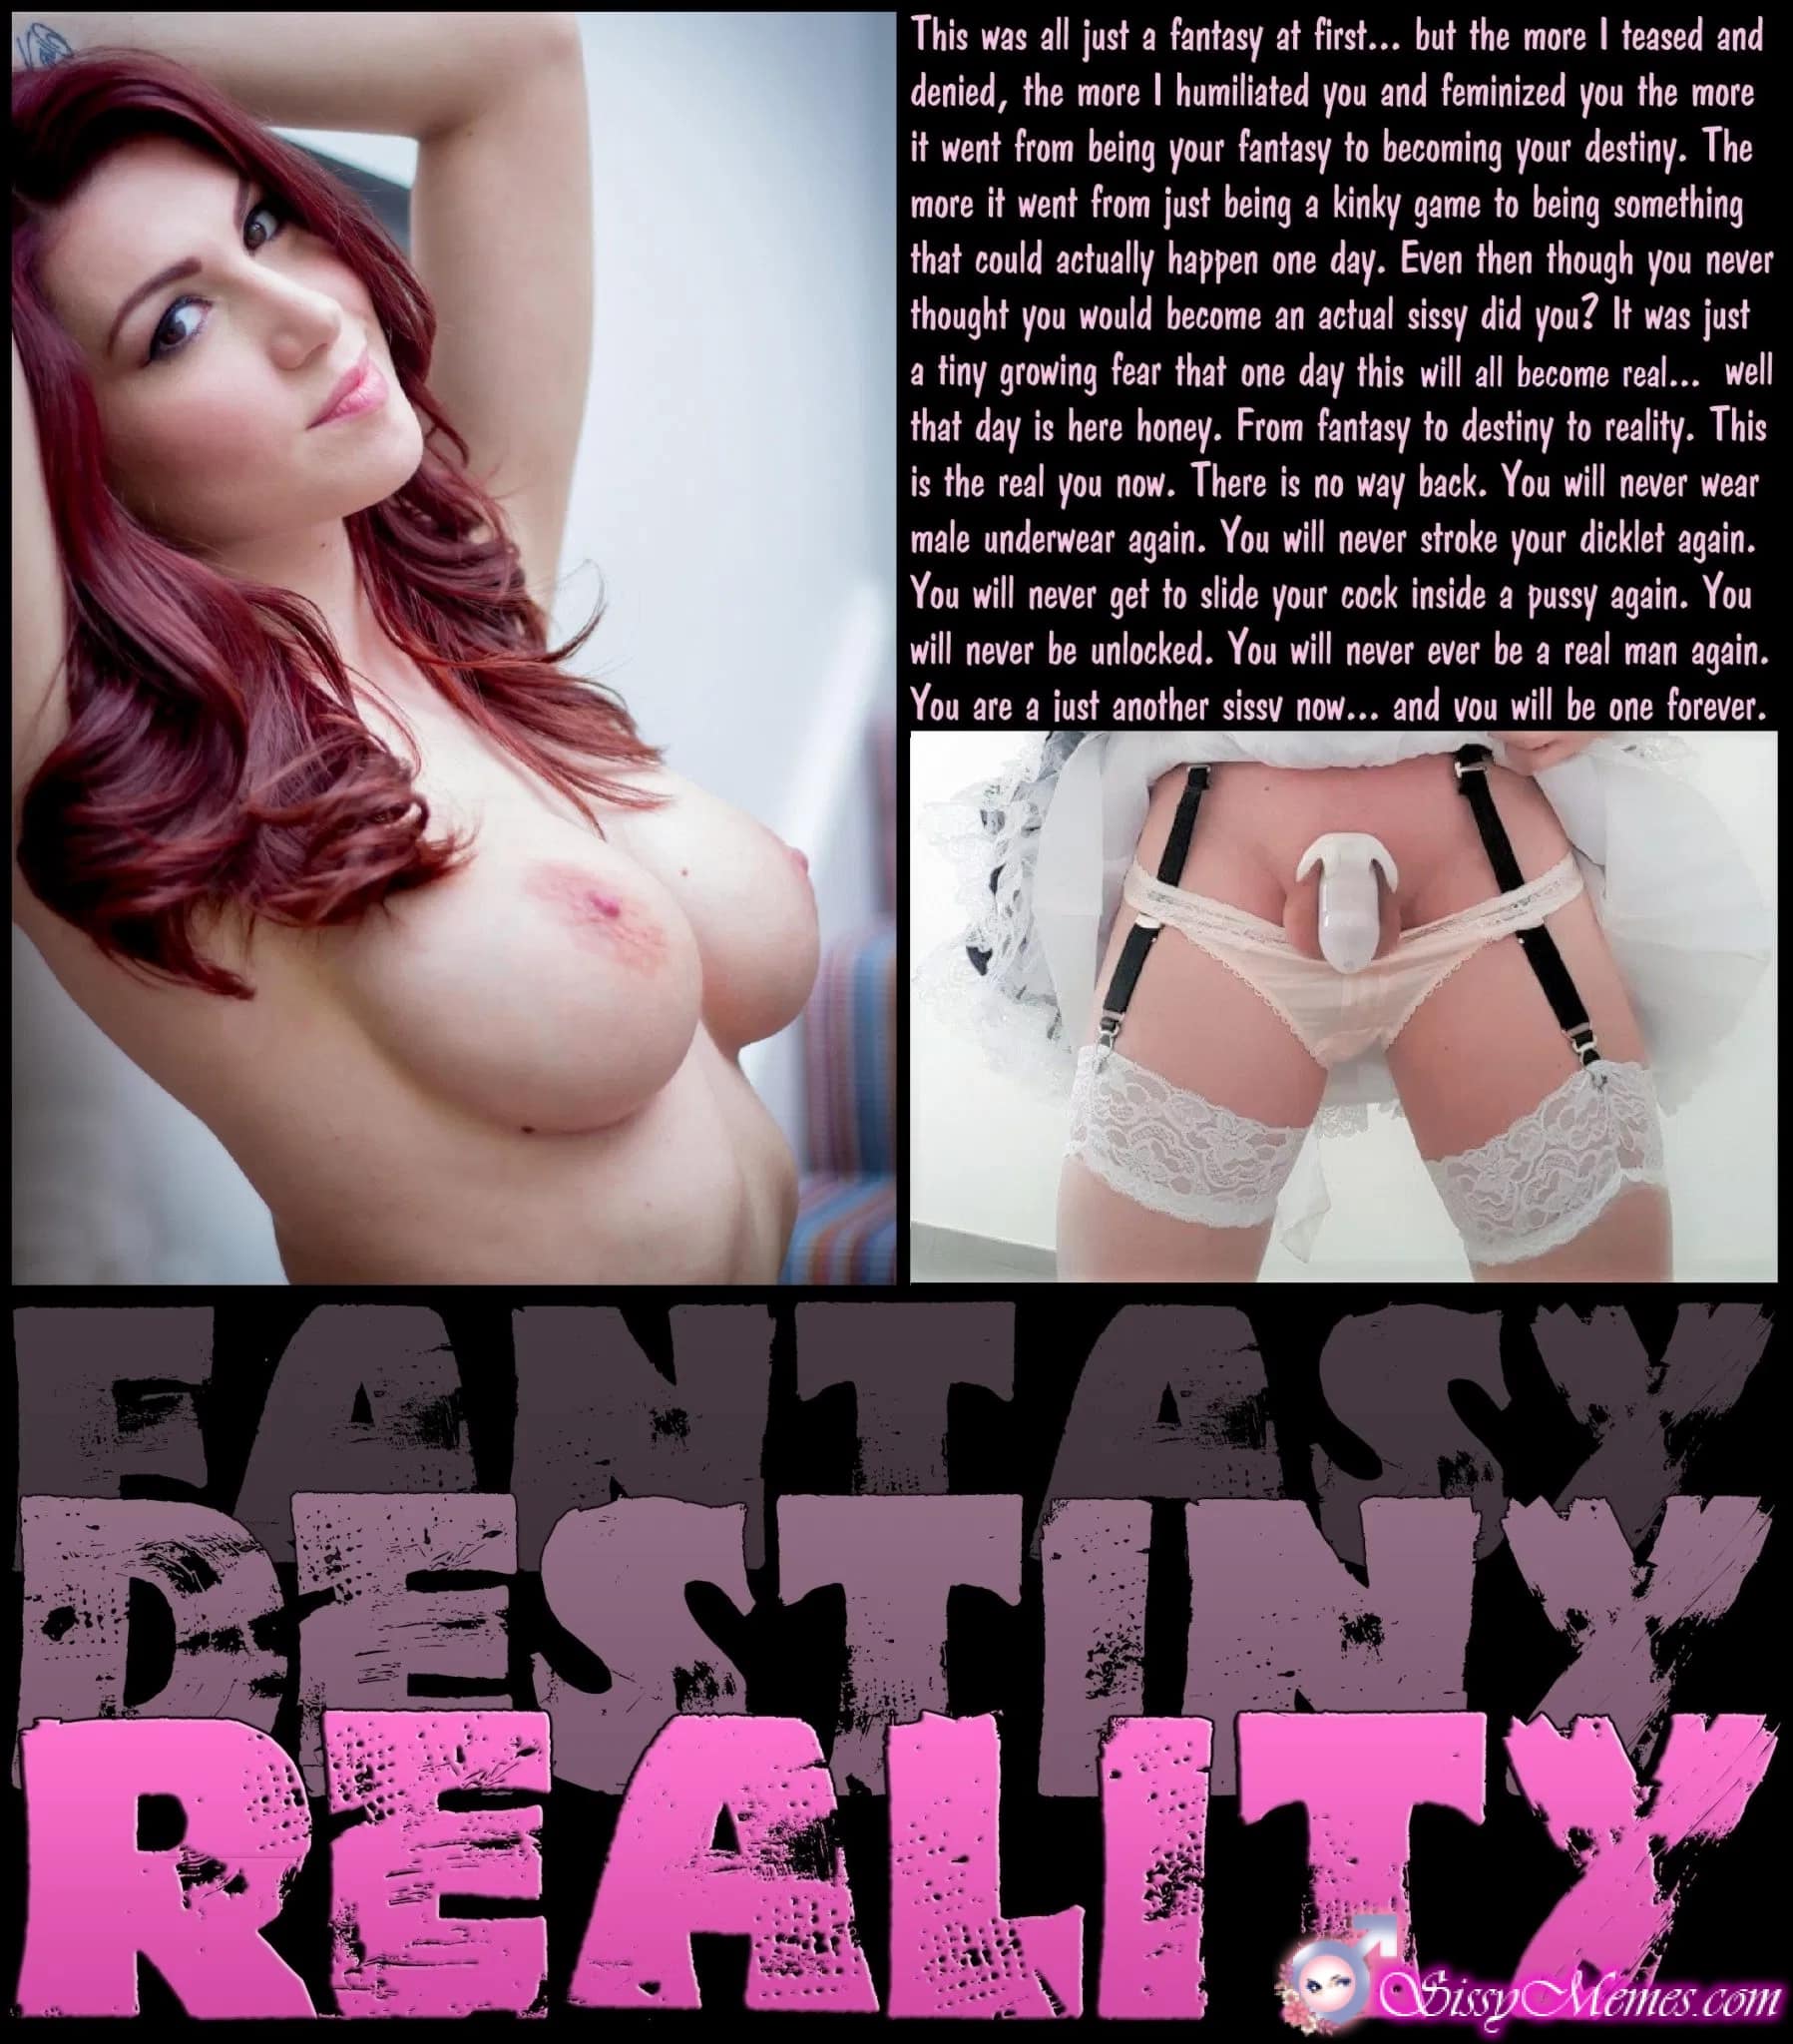 Trap Teen Femboy Chastity hotwife caption: This was all just a fantasy at first… but the more I teased and denied, the more I humiliated you and feminized you the more it went from being your fantasy to becoming your destiny. The more it went from...